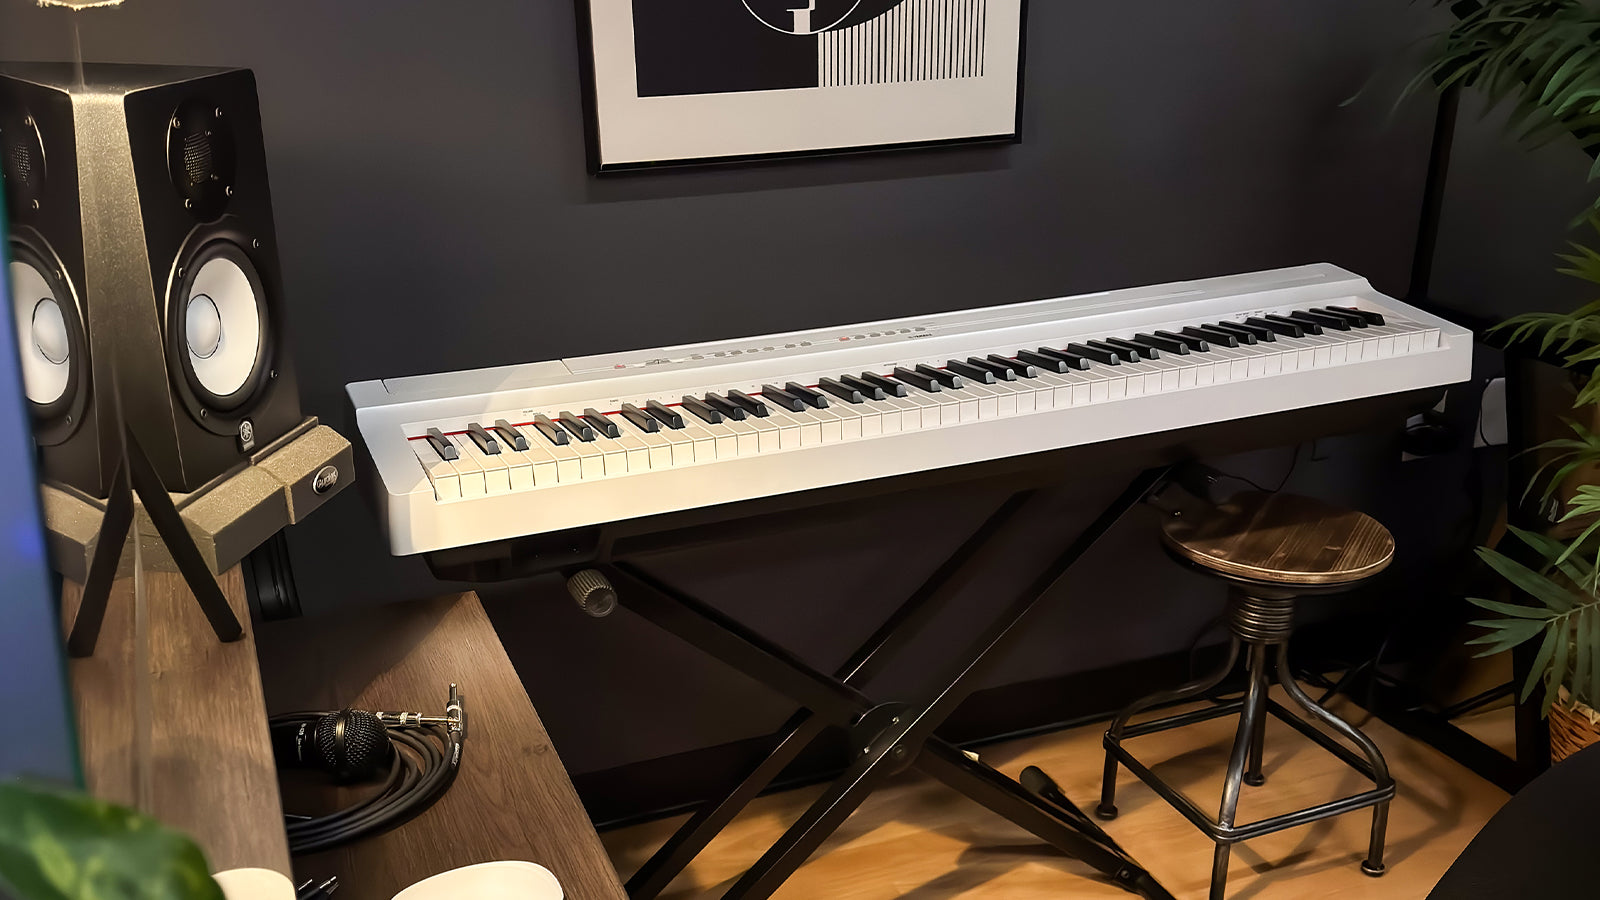 A Yamaha P-125A in a home studio